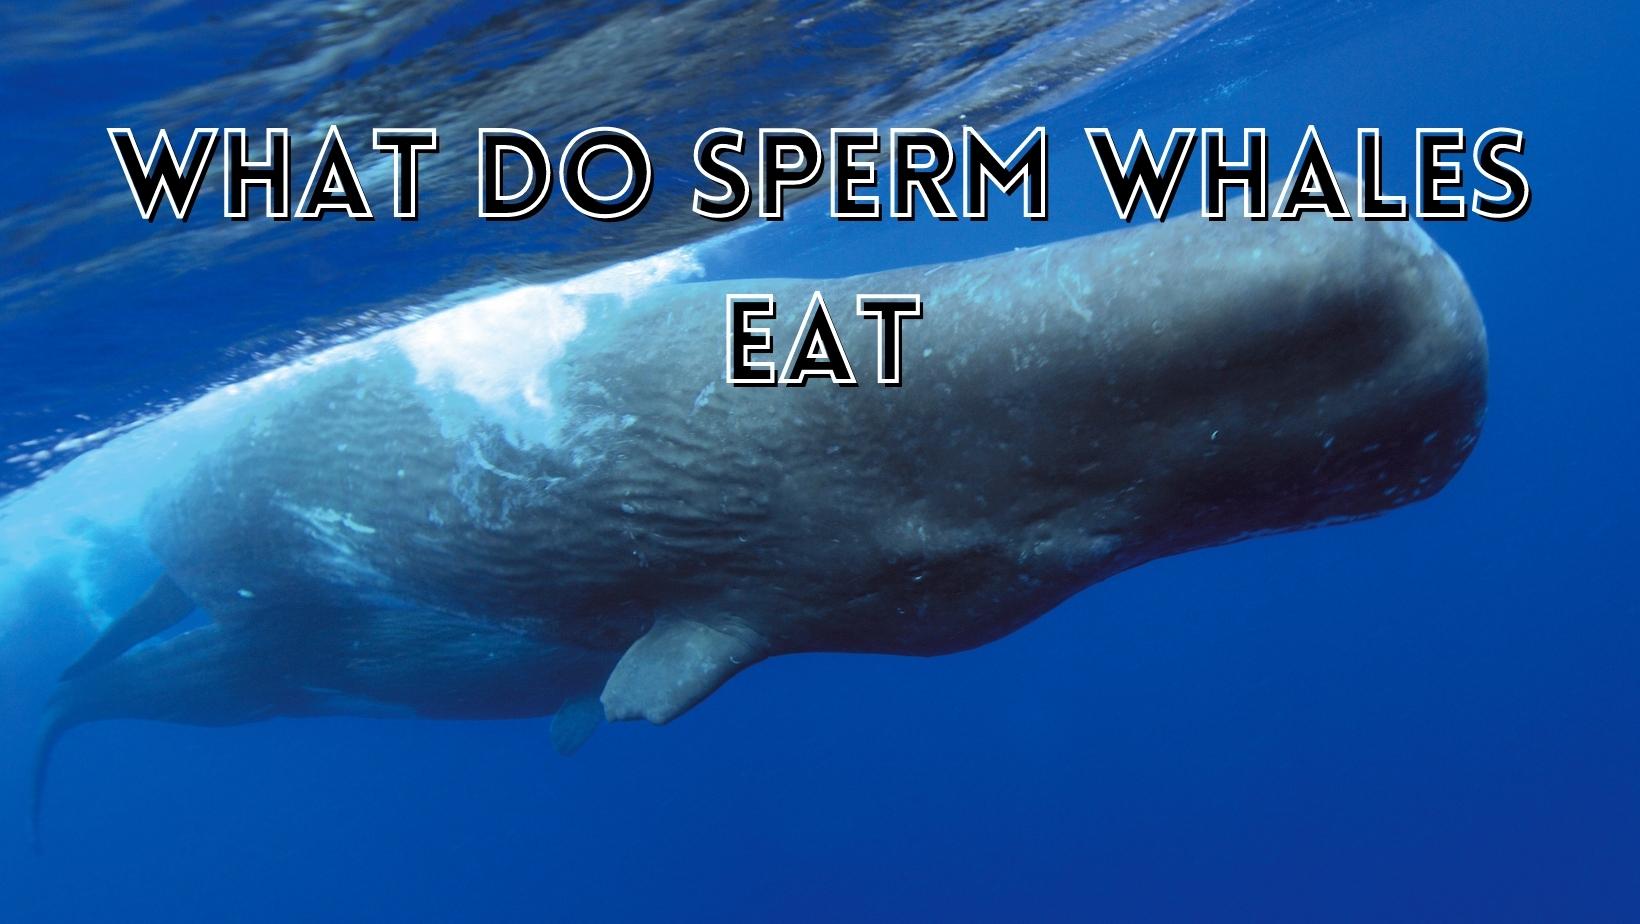 Amazing facts about what sperm whales eat